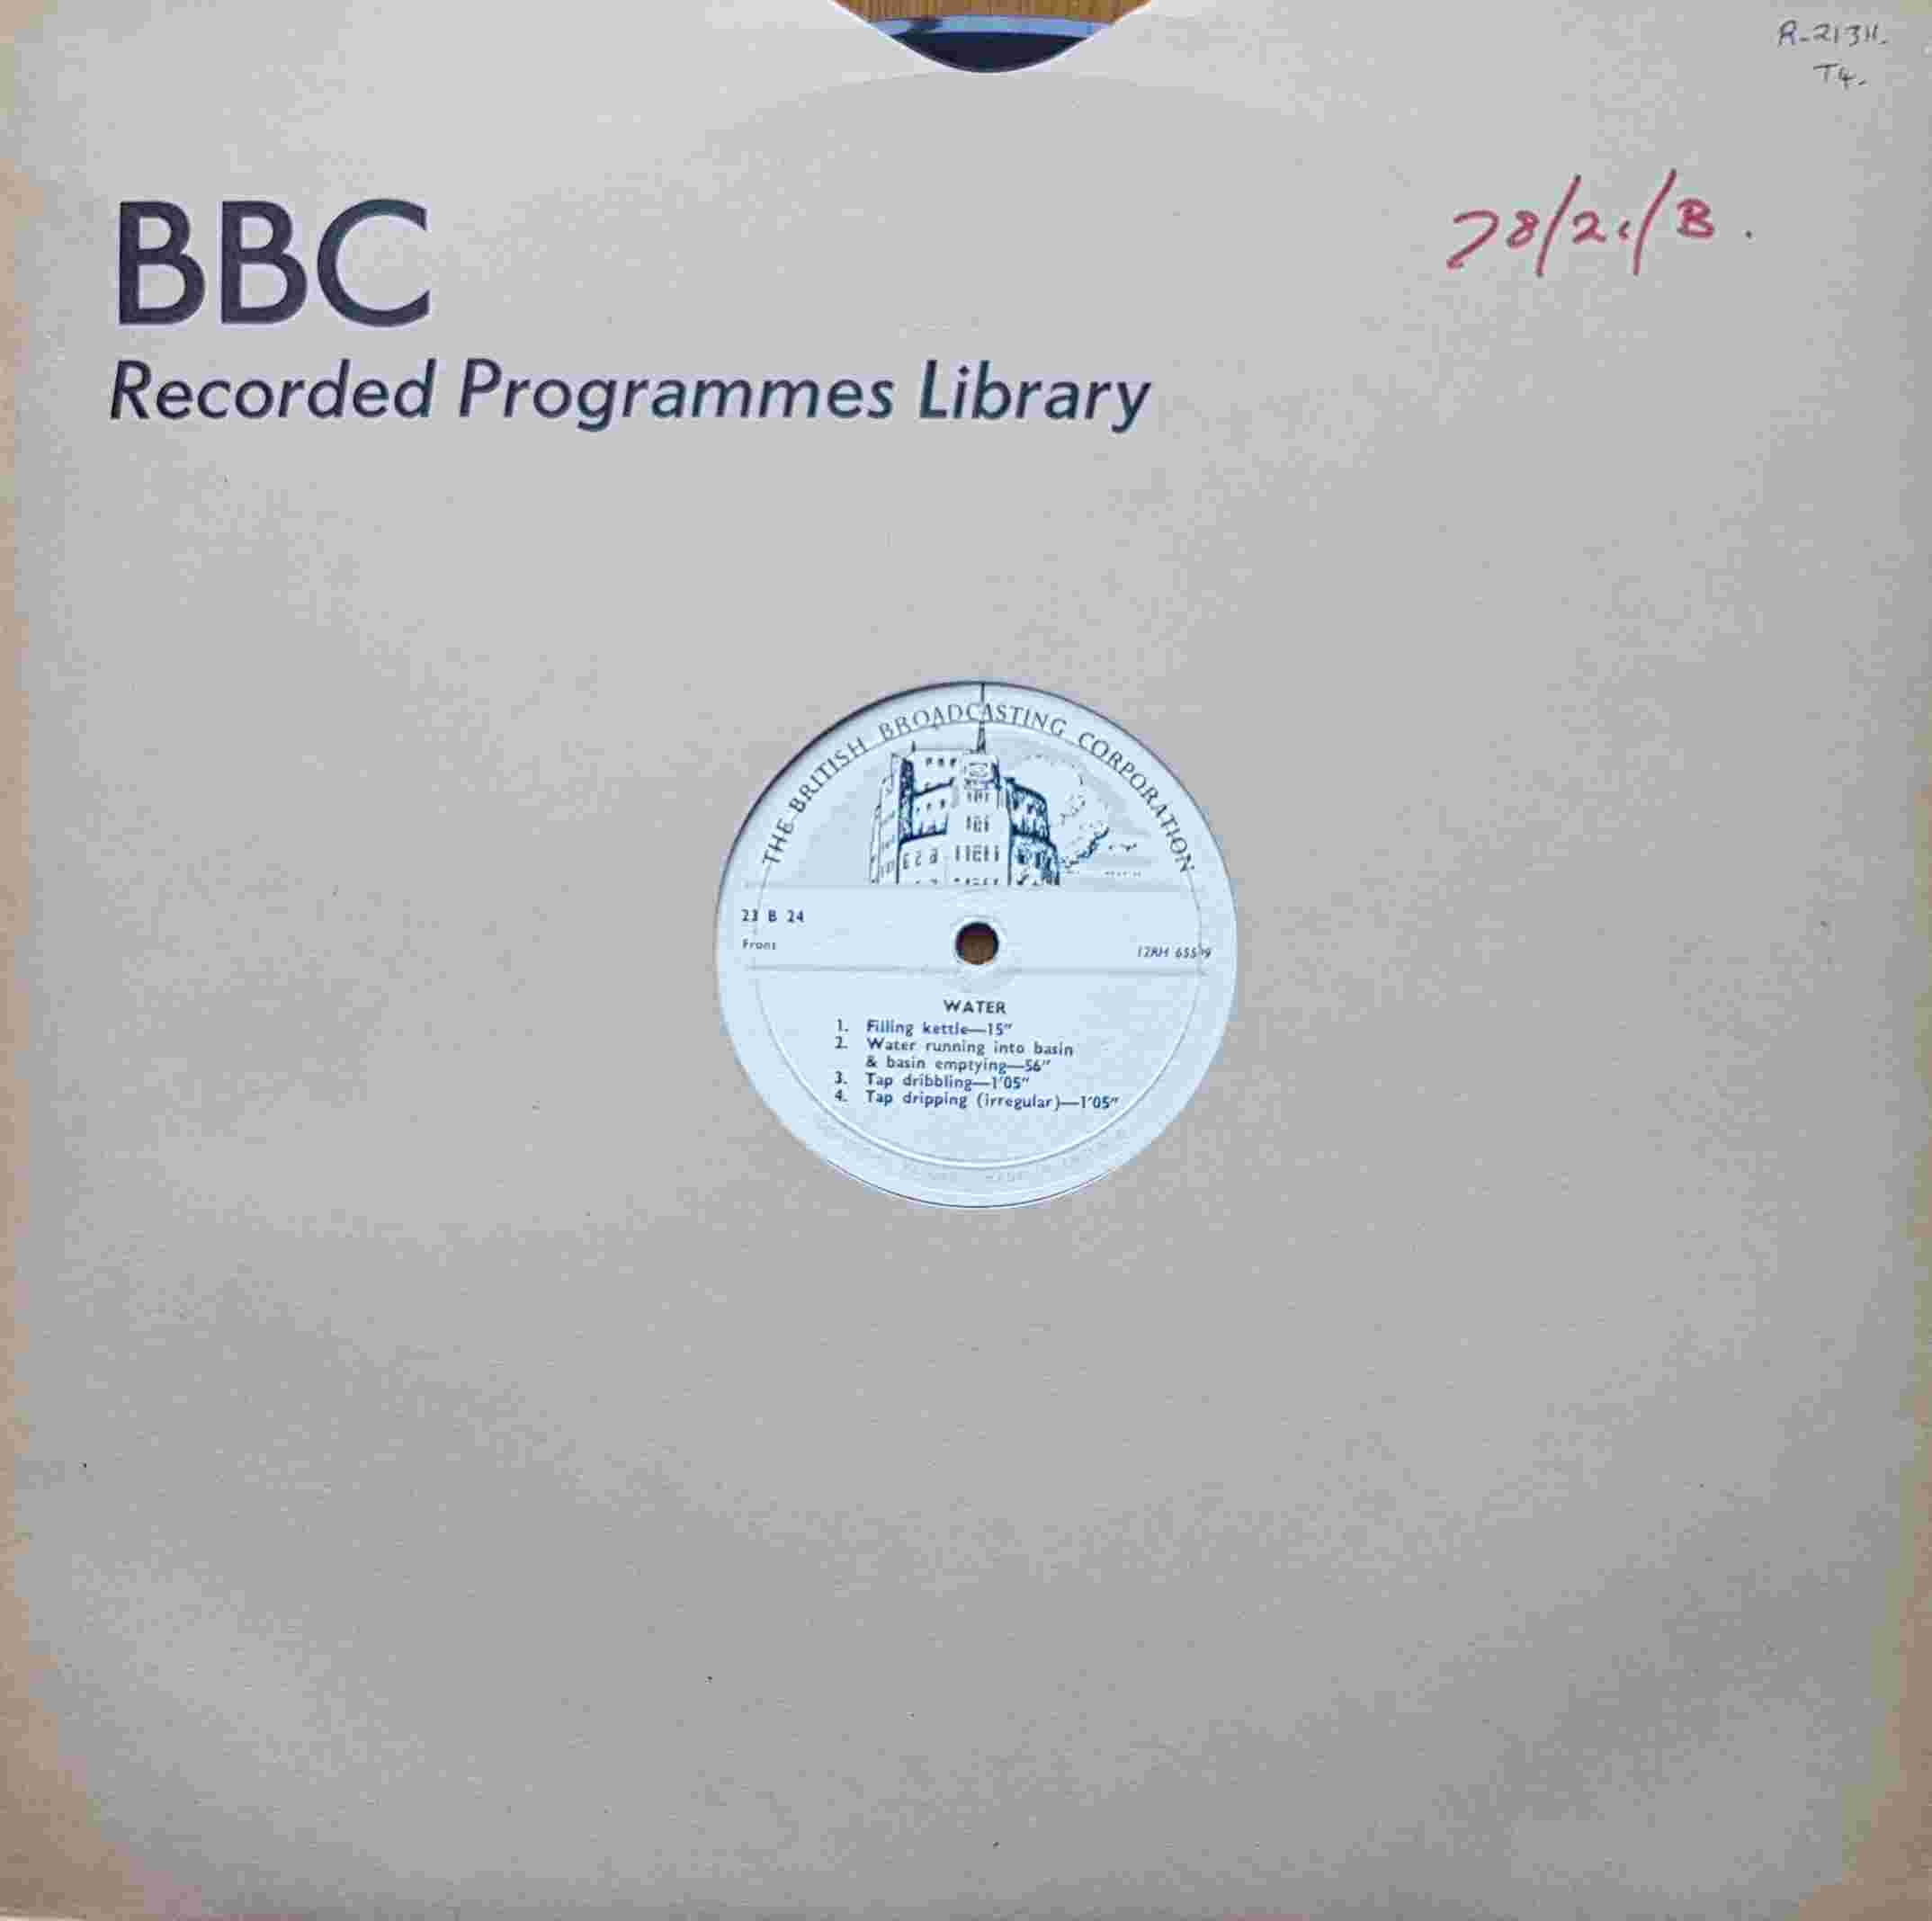 Picture of 23 B 24 Water by artist Not registered from the BBC 78 - Records and Tapes library